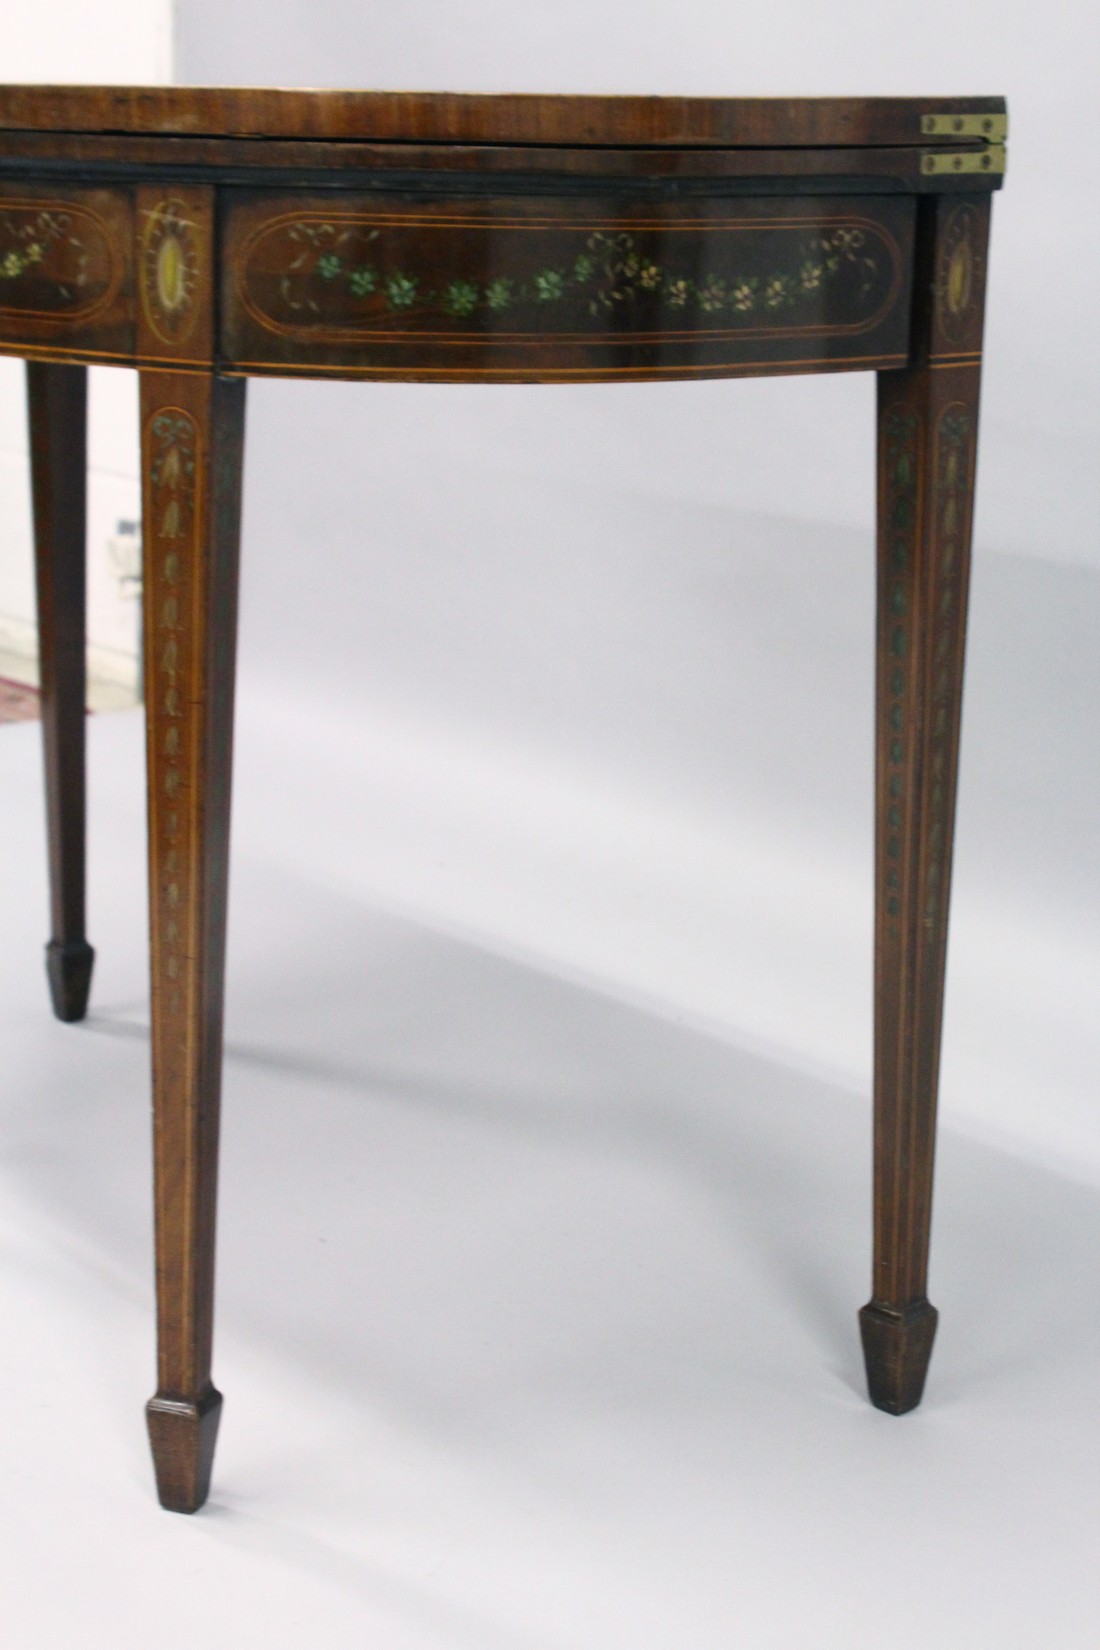 A GEORGIAN SHERATON REVIVAL MAHOGANY CARD TABLE painted with garlands and flowers with banded top - Image 3 of 8